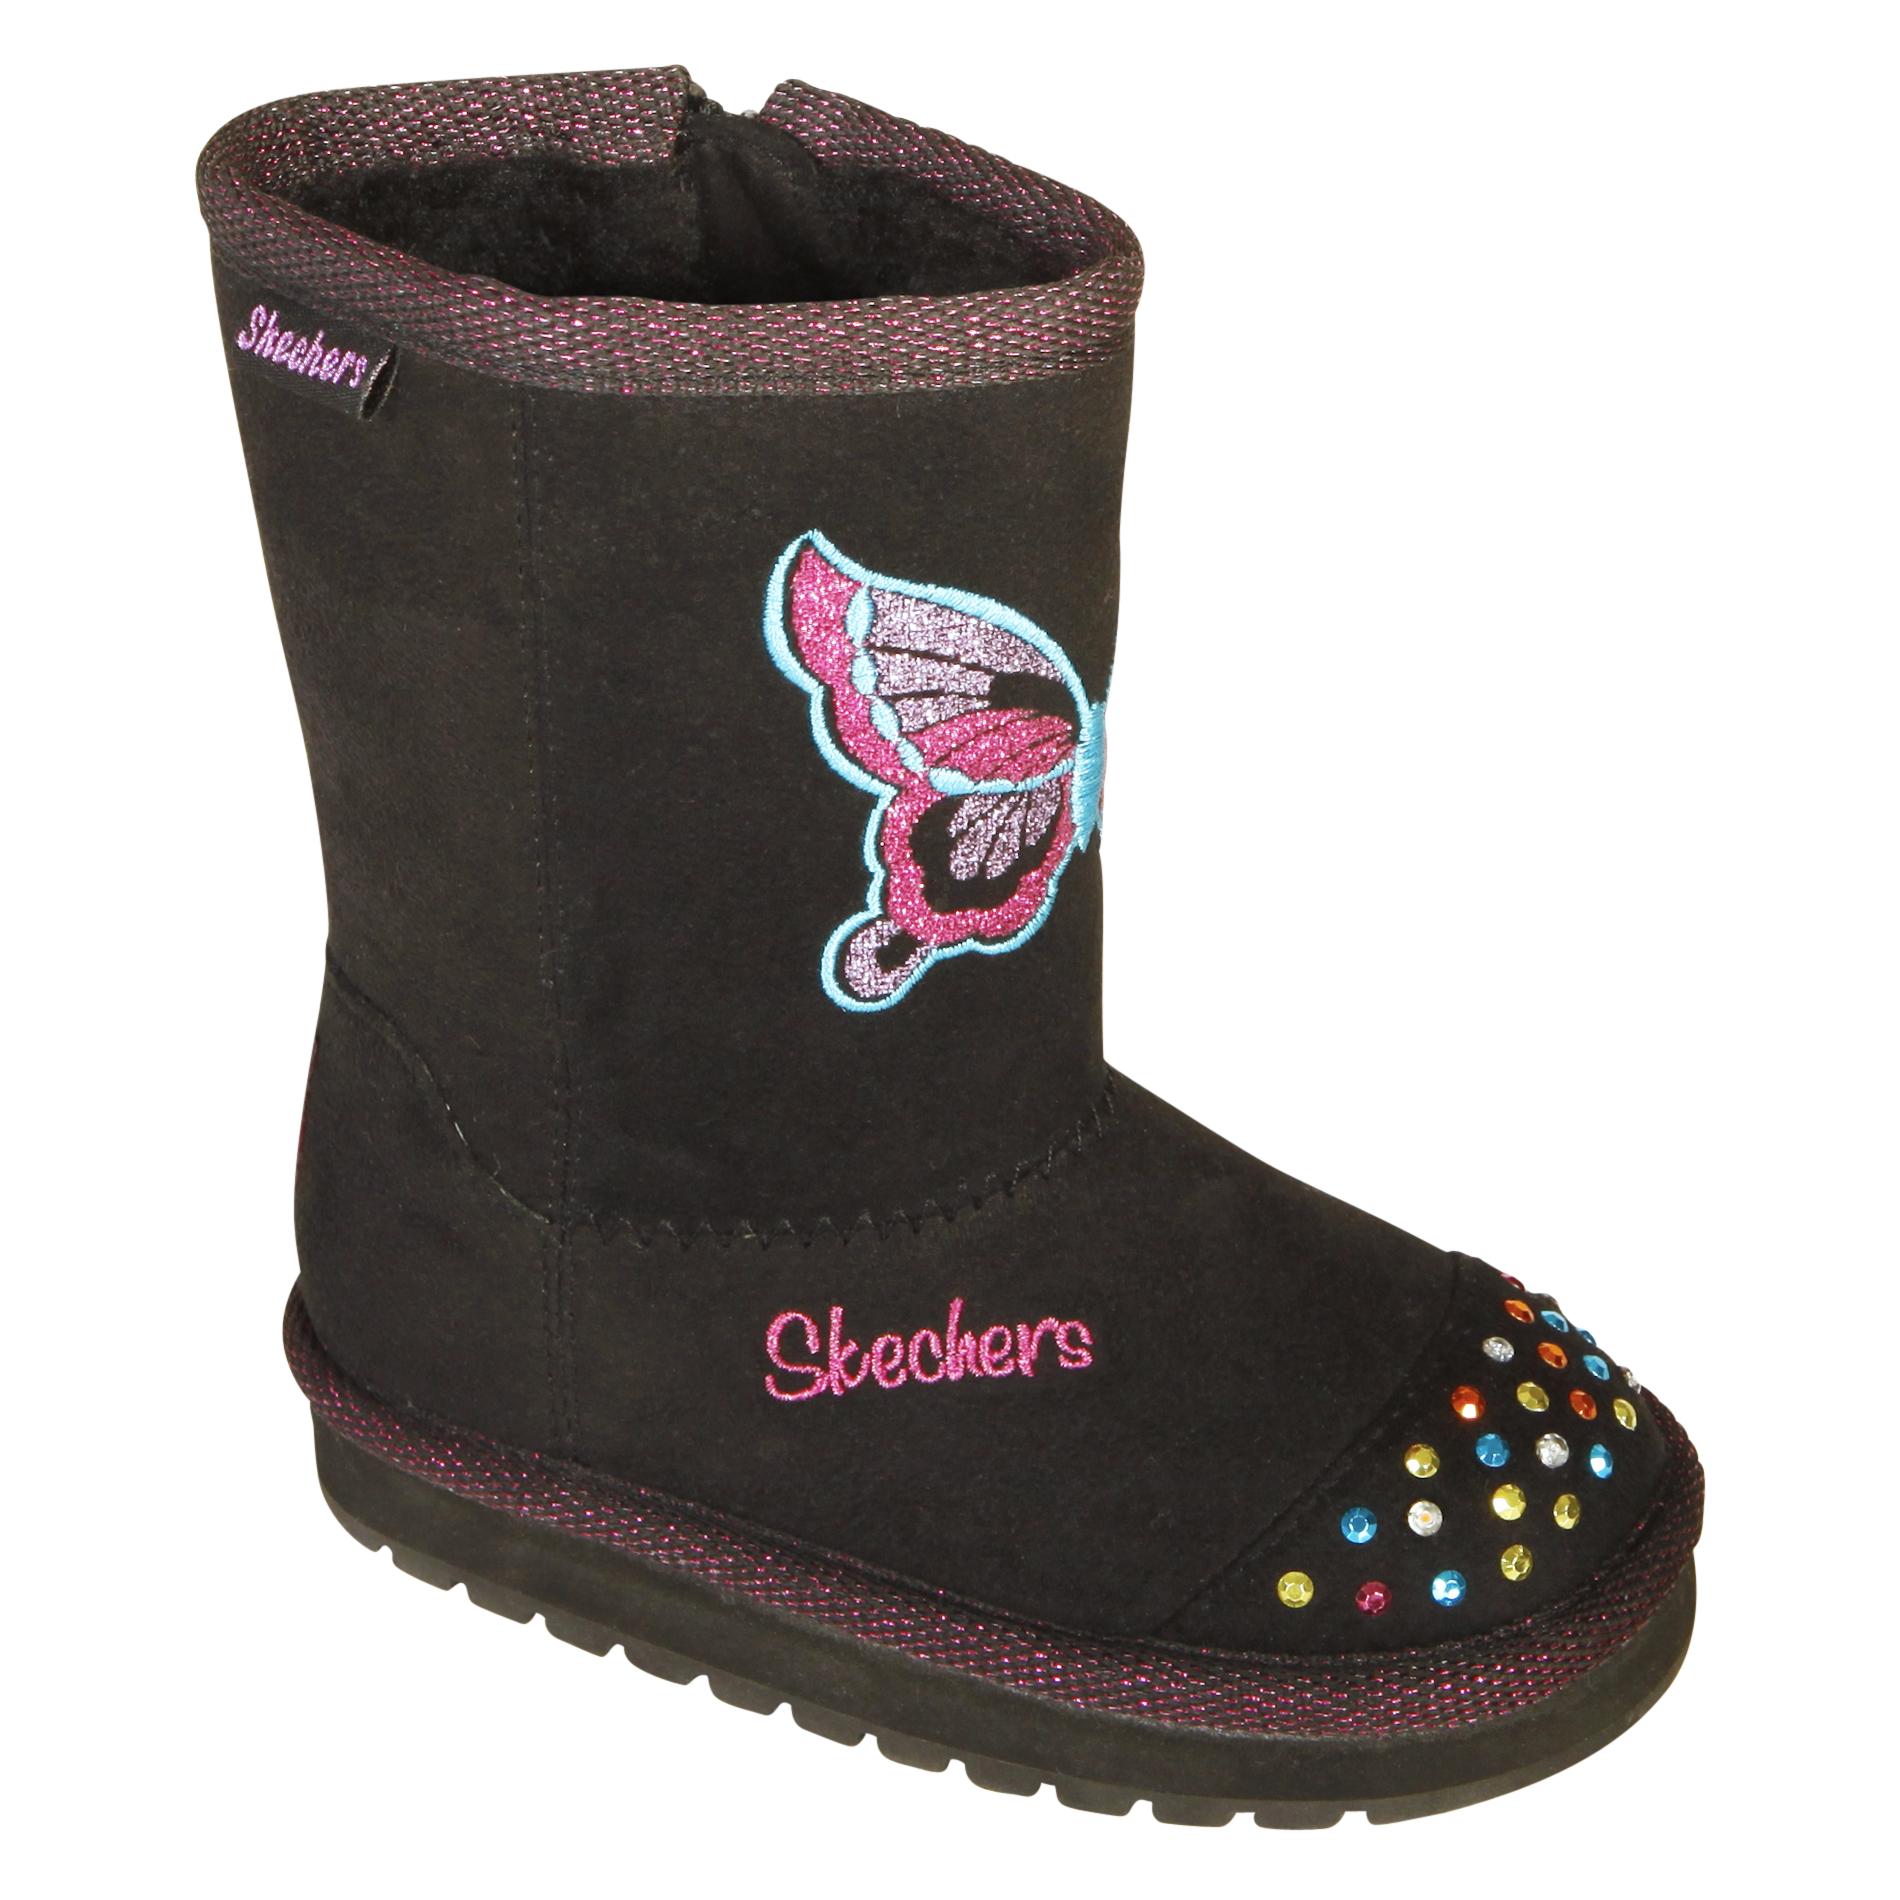 Skechers Toddler Girl's Twinkle Toes Fashion Boot Butterfly Steps - Black